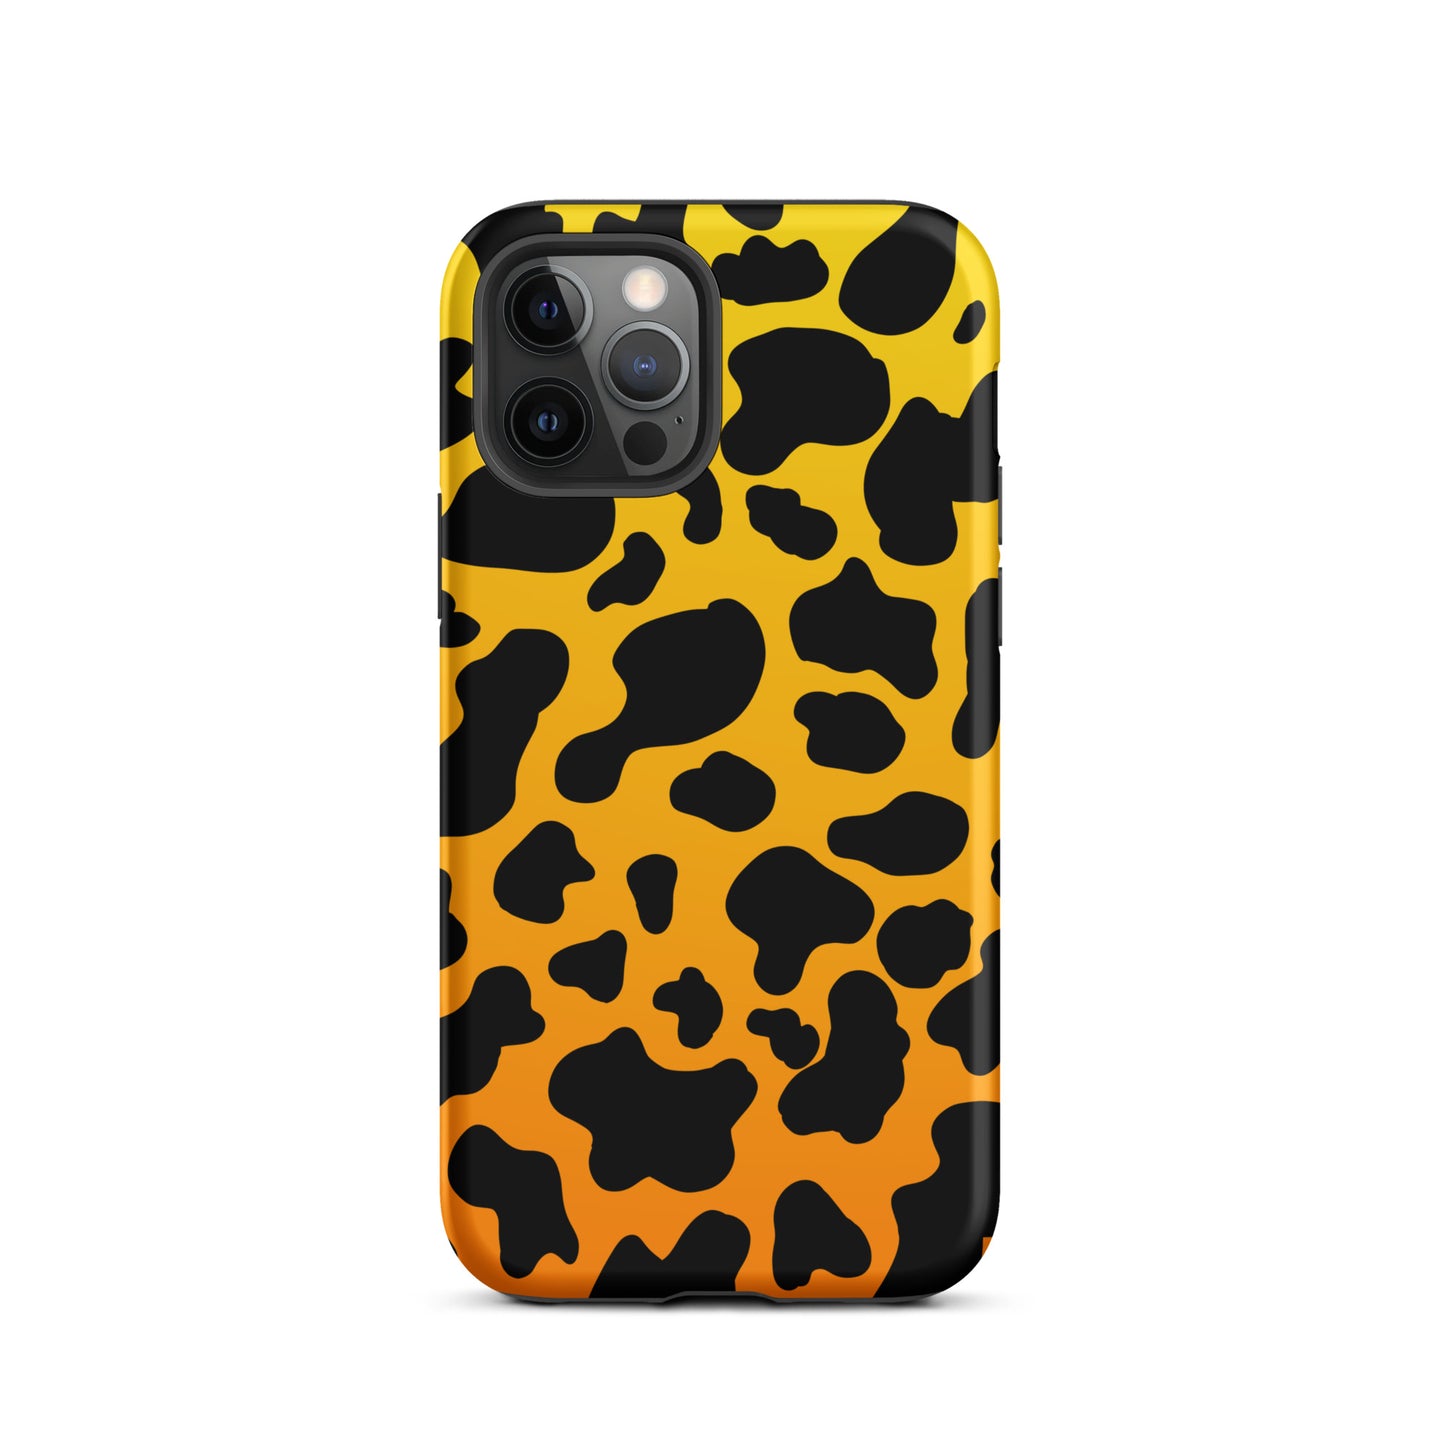 Could Be a Cheetah iPhone® Case